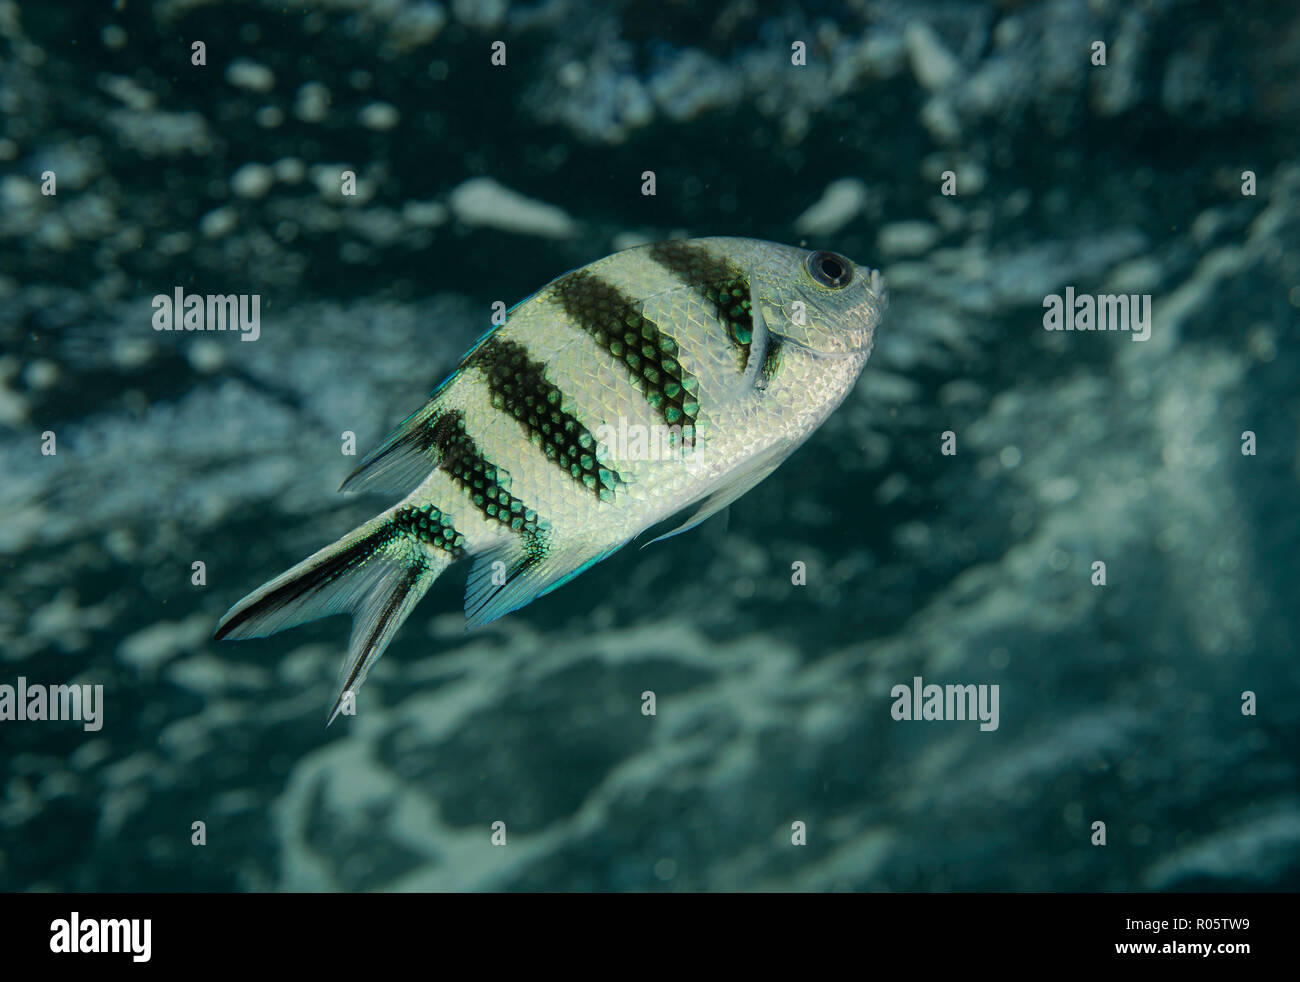 Indo-Pacific sergeant, Sergeant major or Common sergeant, Abudefduf vaigiensis, swimming in surface water, Red sea, Hamata, Egypt Stock Photo